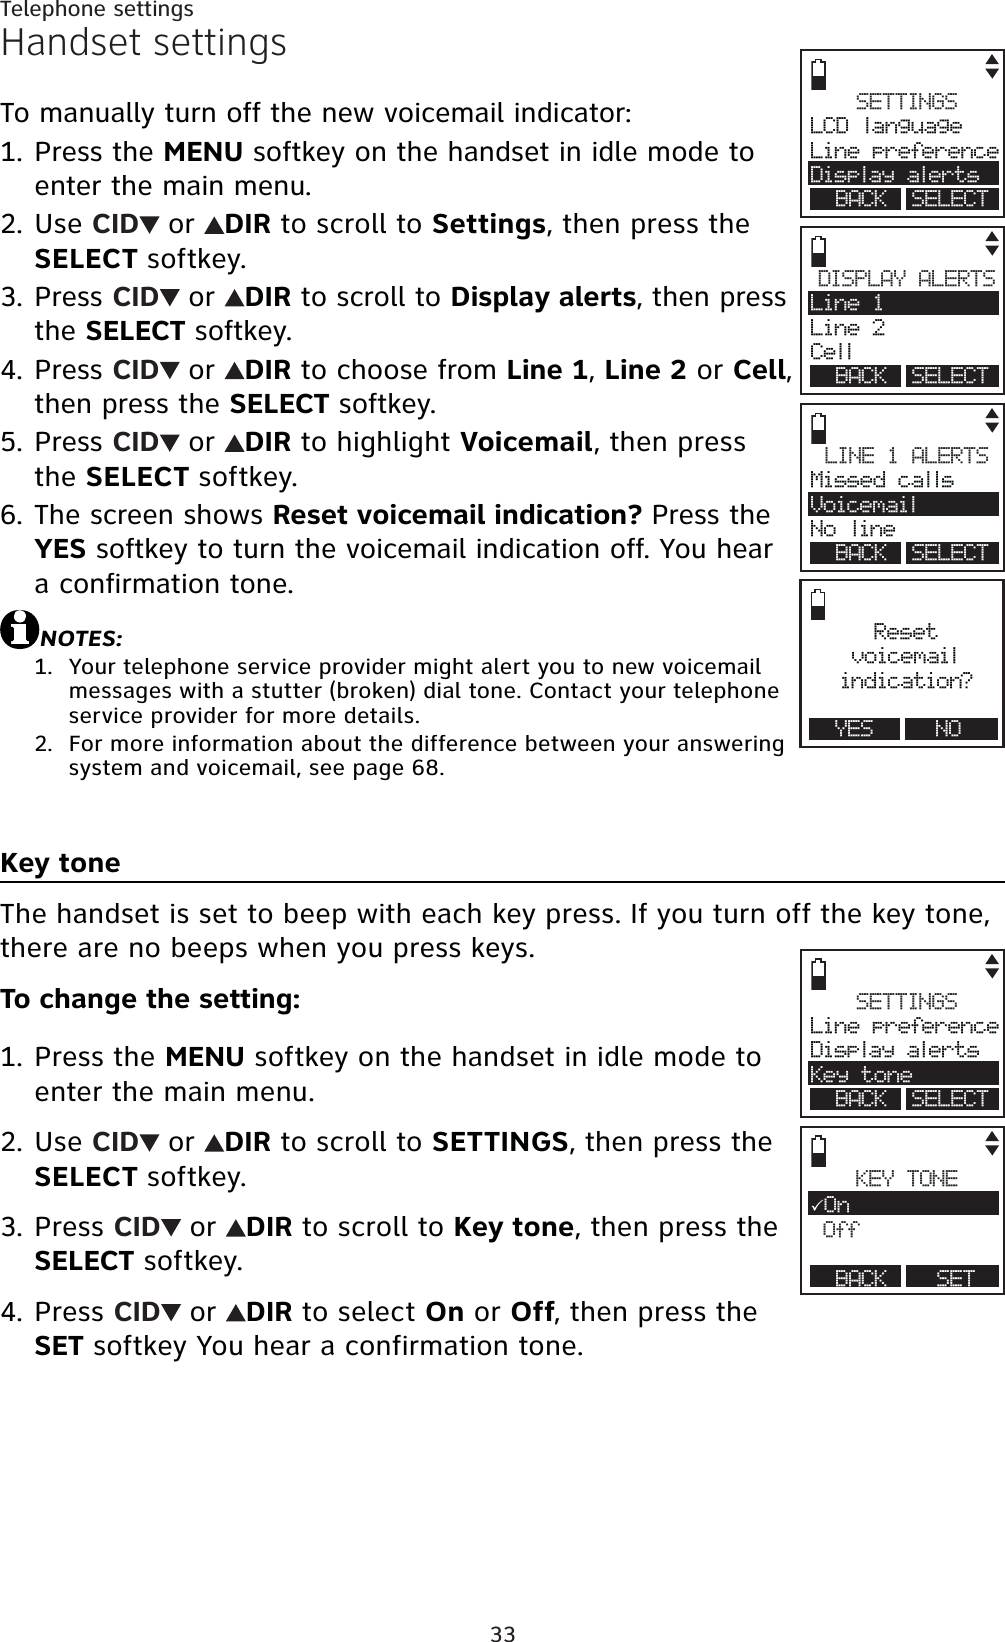 33Telephone settingsHandset settingsTo manually turn off the new voicemail indicator:Press the MENU softkey on the handset in idle mode to enter the main menu.Use CID or DIR to scroll to Settings, then press the SELECT softkey.Press CID or DIR to scroll to Display alerts, then press the SELECT softkey.Press CID or DIR to choose from Line 1,Line 2 or Cell,then press the SELECT softkey.Press CID or DIR to highlight Voicemail, then press the SELECT softkey.The screen shows Reset voicemail indication? Press the YES softkey to turn the voicemail indication off. You hear a confirmation tone.NOTES:Your telephone service provider might alert you to new voicemail messages with a stutter (broken) dial tone. Contact your telephone service provider for more details.For more information about the difference between your answering system and voicemail, see page 68.Key toneThe handset is set to beep with each key press. If you turn off the key tone, there are no beeps when you press keys.To change the setting:Press the MENU softkey on the handset in idle mode to enter the main menu.Use CID or DIR to scroll to SETTINGS, then press the SELECT softkey.Press CID or DIR to scroll to Key tone, then press the SELECT softkey.Press CID or DIR to select On or Off, then press the SET softkey You hear a confirmation tone.1.2.3.4.5.6.1.2.1.2.3.4.SETTINGSLine preferenceDisplay alertsKey toneBACK SELECTKEY TONE3OnOffBACK SETSETTINGSLCD languageLine preferenceDisplay alertsBACK SELECTDISPLAY ALERTSLine 1Line 2CellBACK SELECTResetvoicemailindication?YES NOLINE 1 ALERTSMissed callsVoicemailNo lineBACK SELECT